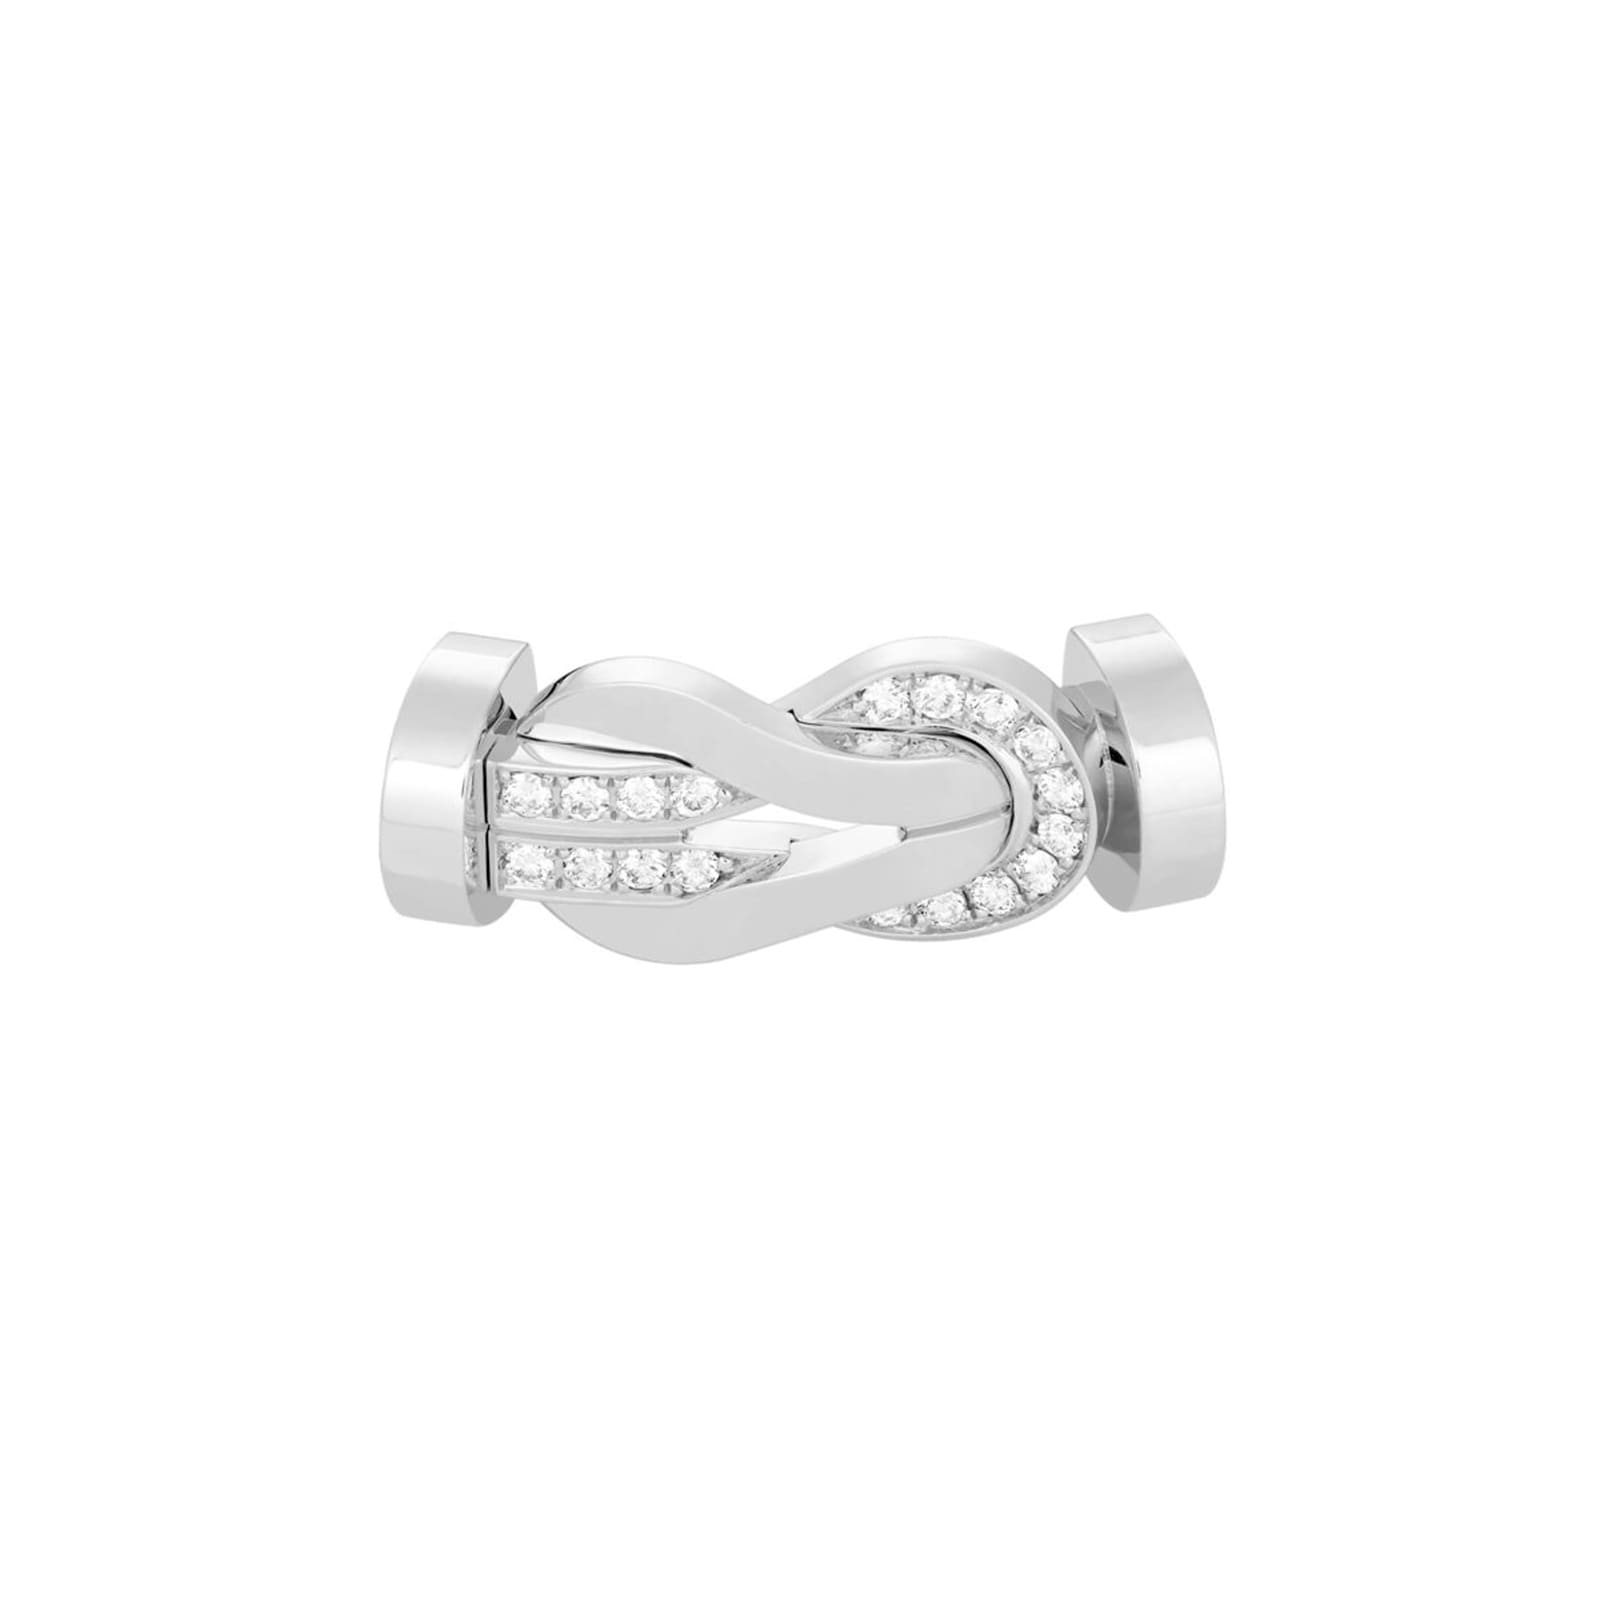 Chance Infinie 18ct White Gold 0.29ct Diamond Buckle Large Model